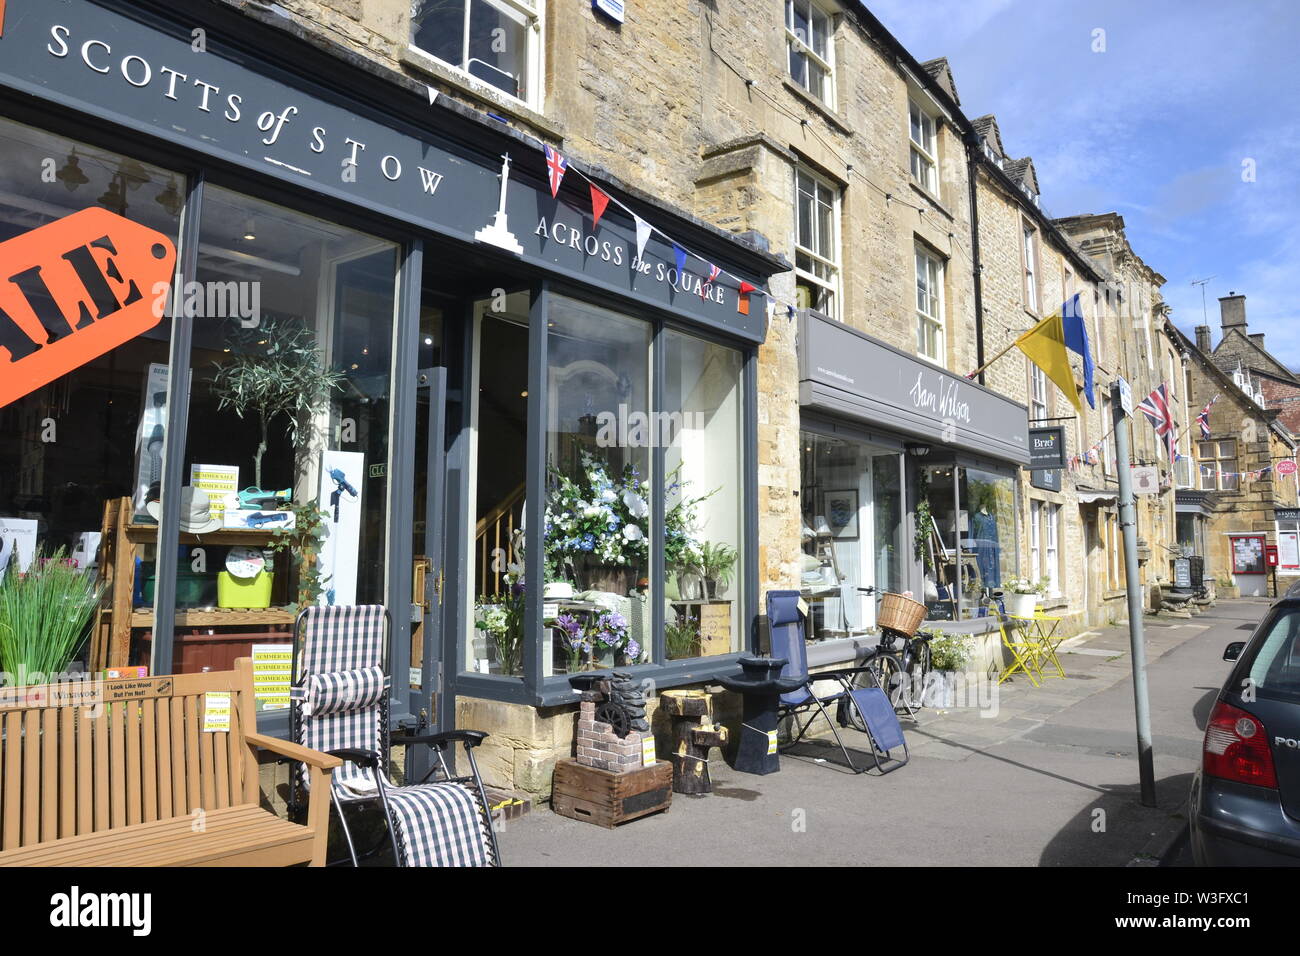 Stow-on-the-Wold, Gloucestershire, England, UK. A village in the Cotswolds  Stock Photo - Alamy